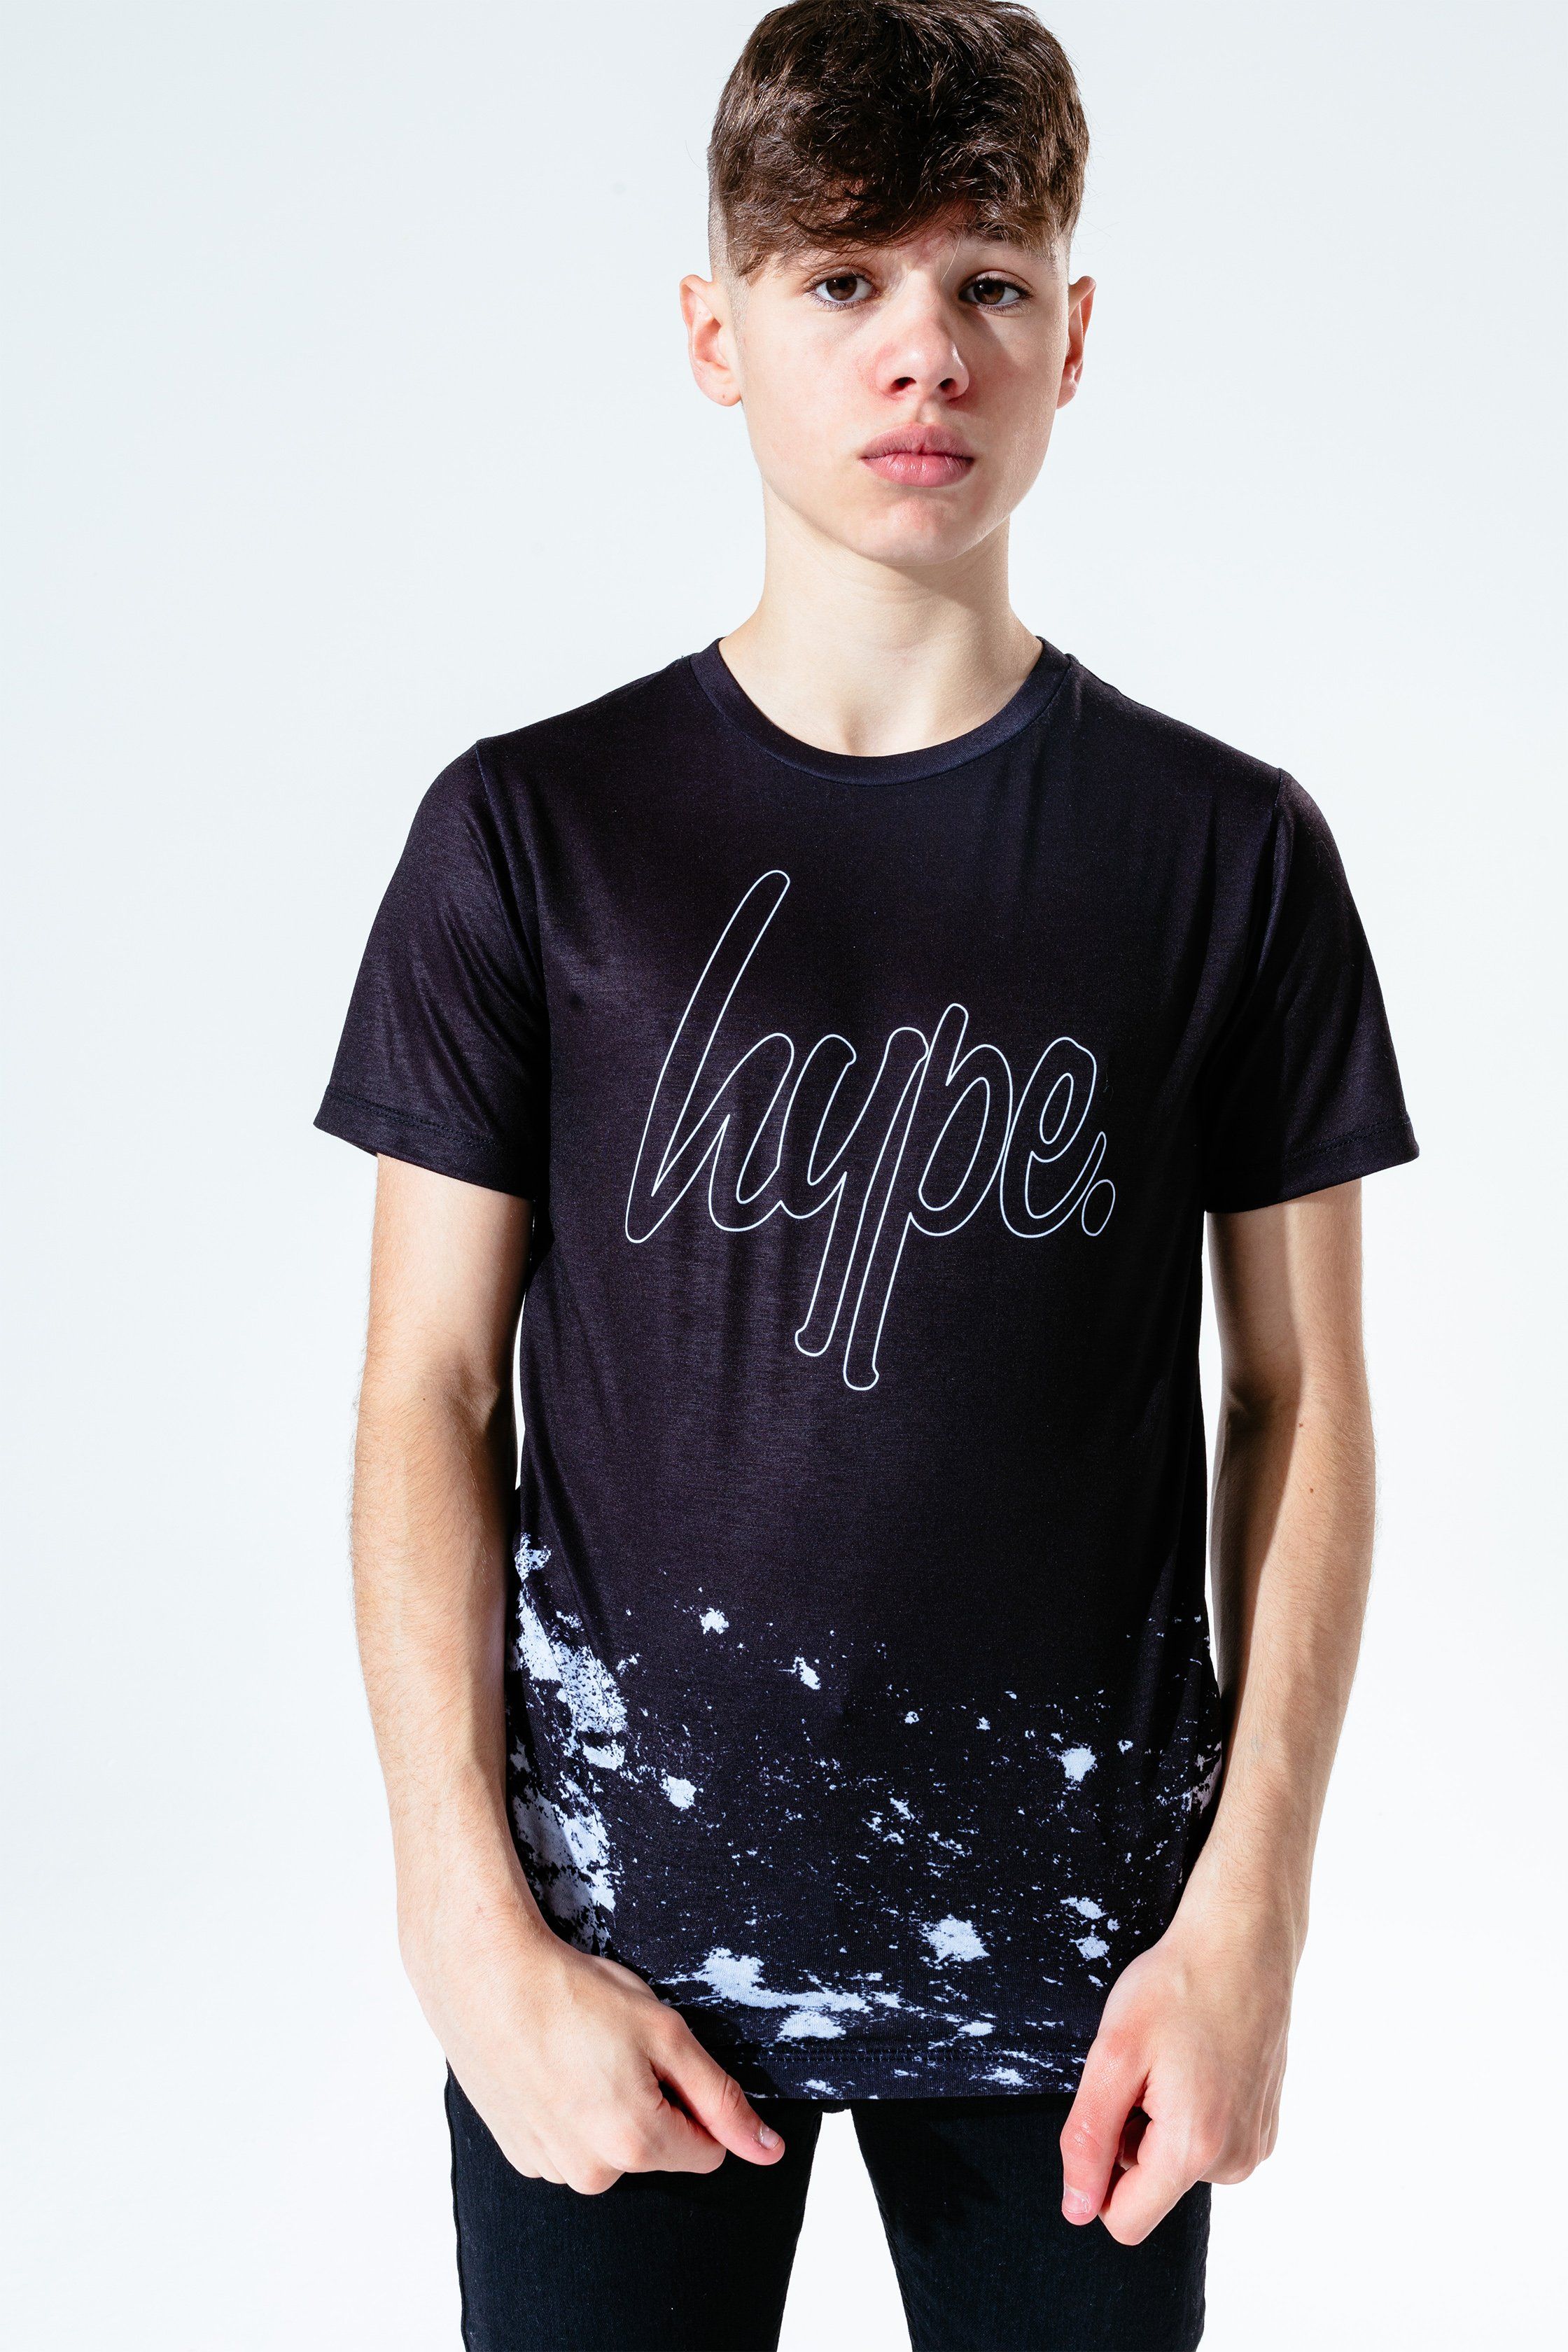 The HYPE. mono painters kids t-shirt features a monochrome colour palette. In our standard kids tee shape in a 95% polyester and 5% cotton fabric base for the ultimate comfort. Finished with a crew neckline and short sleeves with the iconic HYPE. script logo across the front. The design features a paint splat inspired print. Wear with black denim jeans to complete the look. Machine wash at 30 degrees.